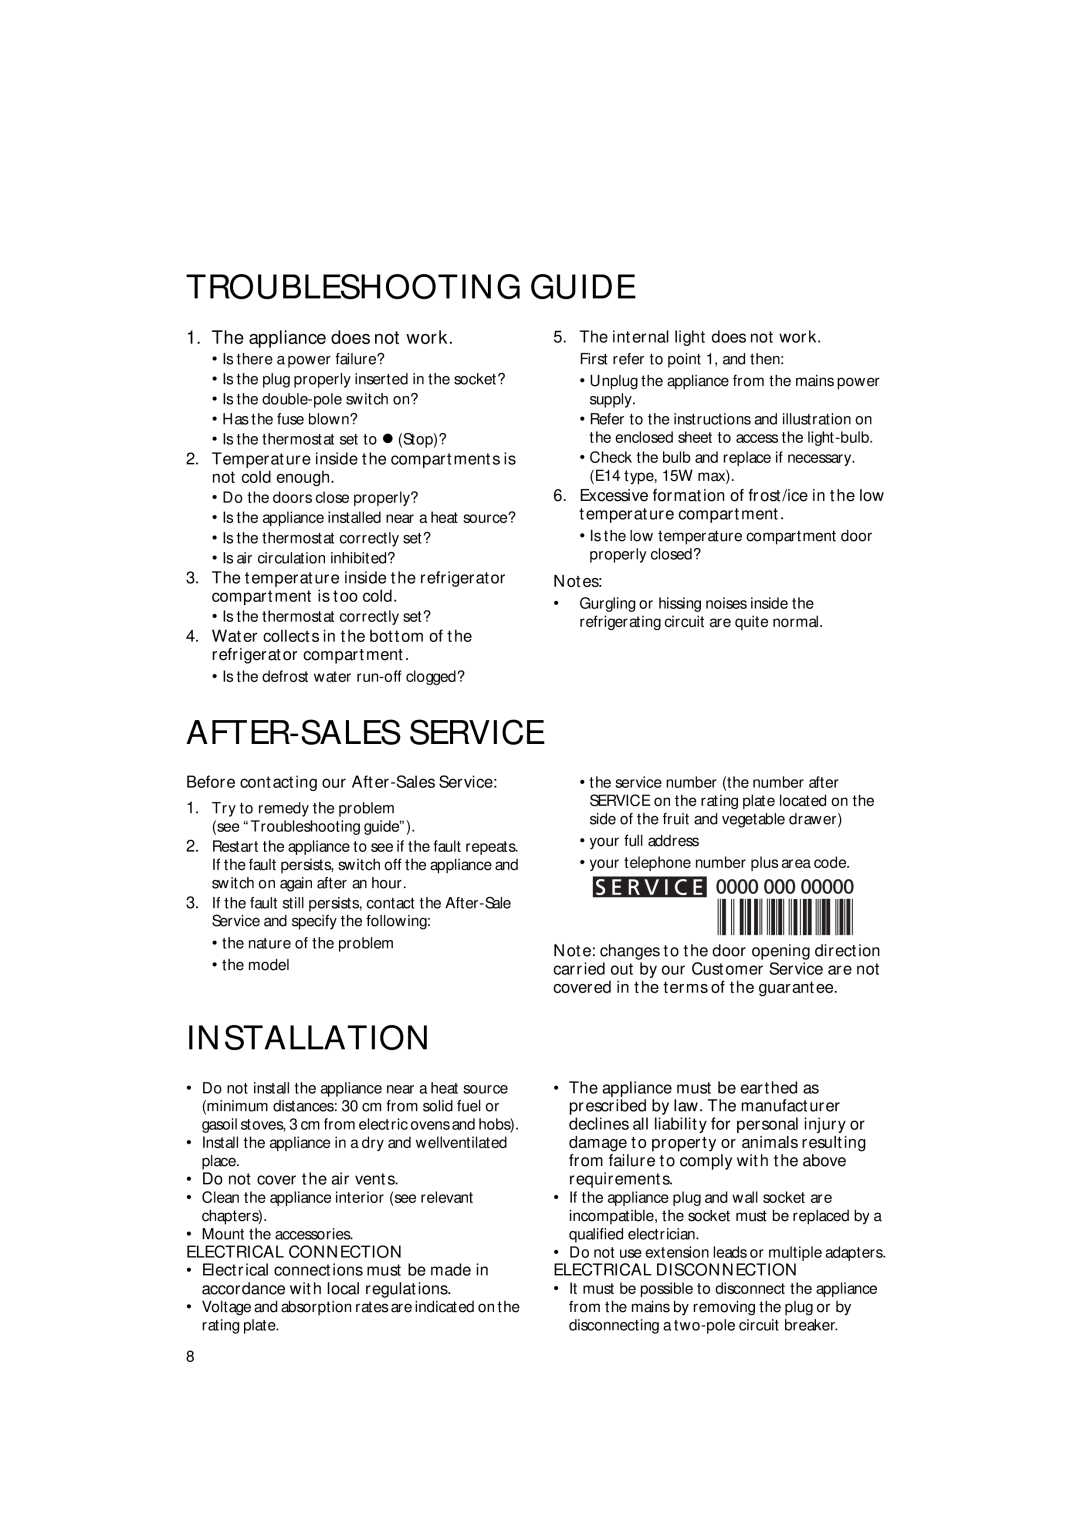 CDA FW350 manual Troubleshooting Guide, After-Sales Service, Installation, The appliance does not work 